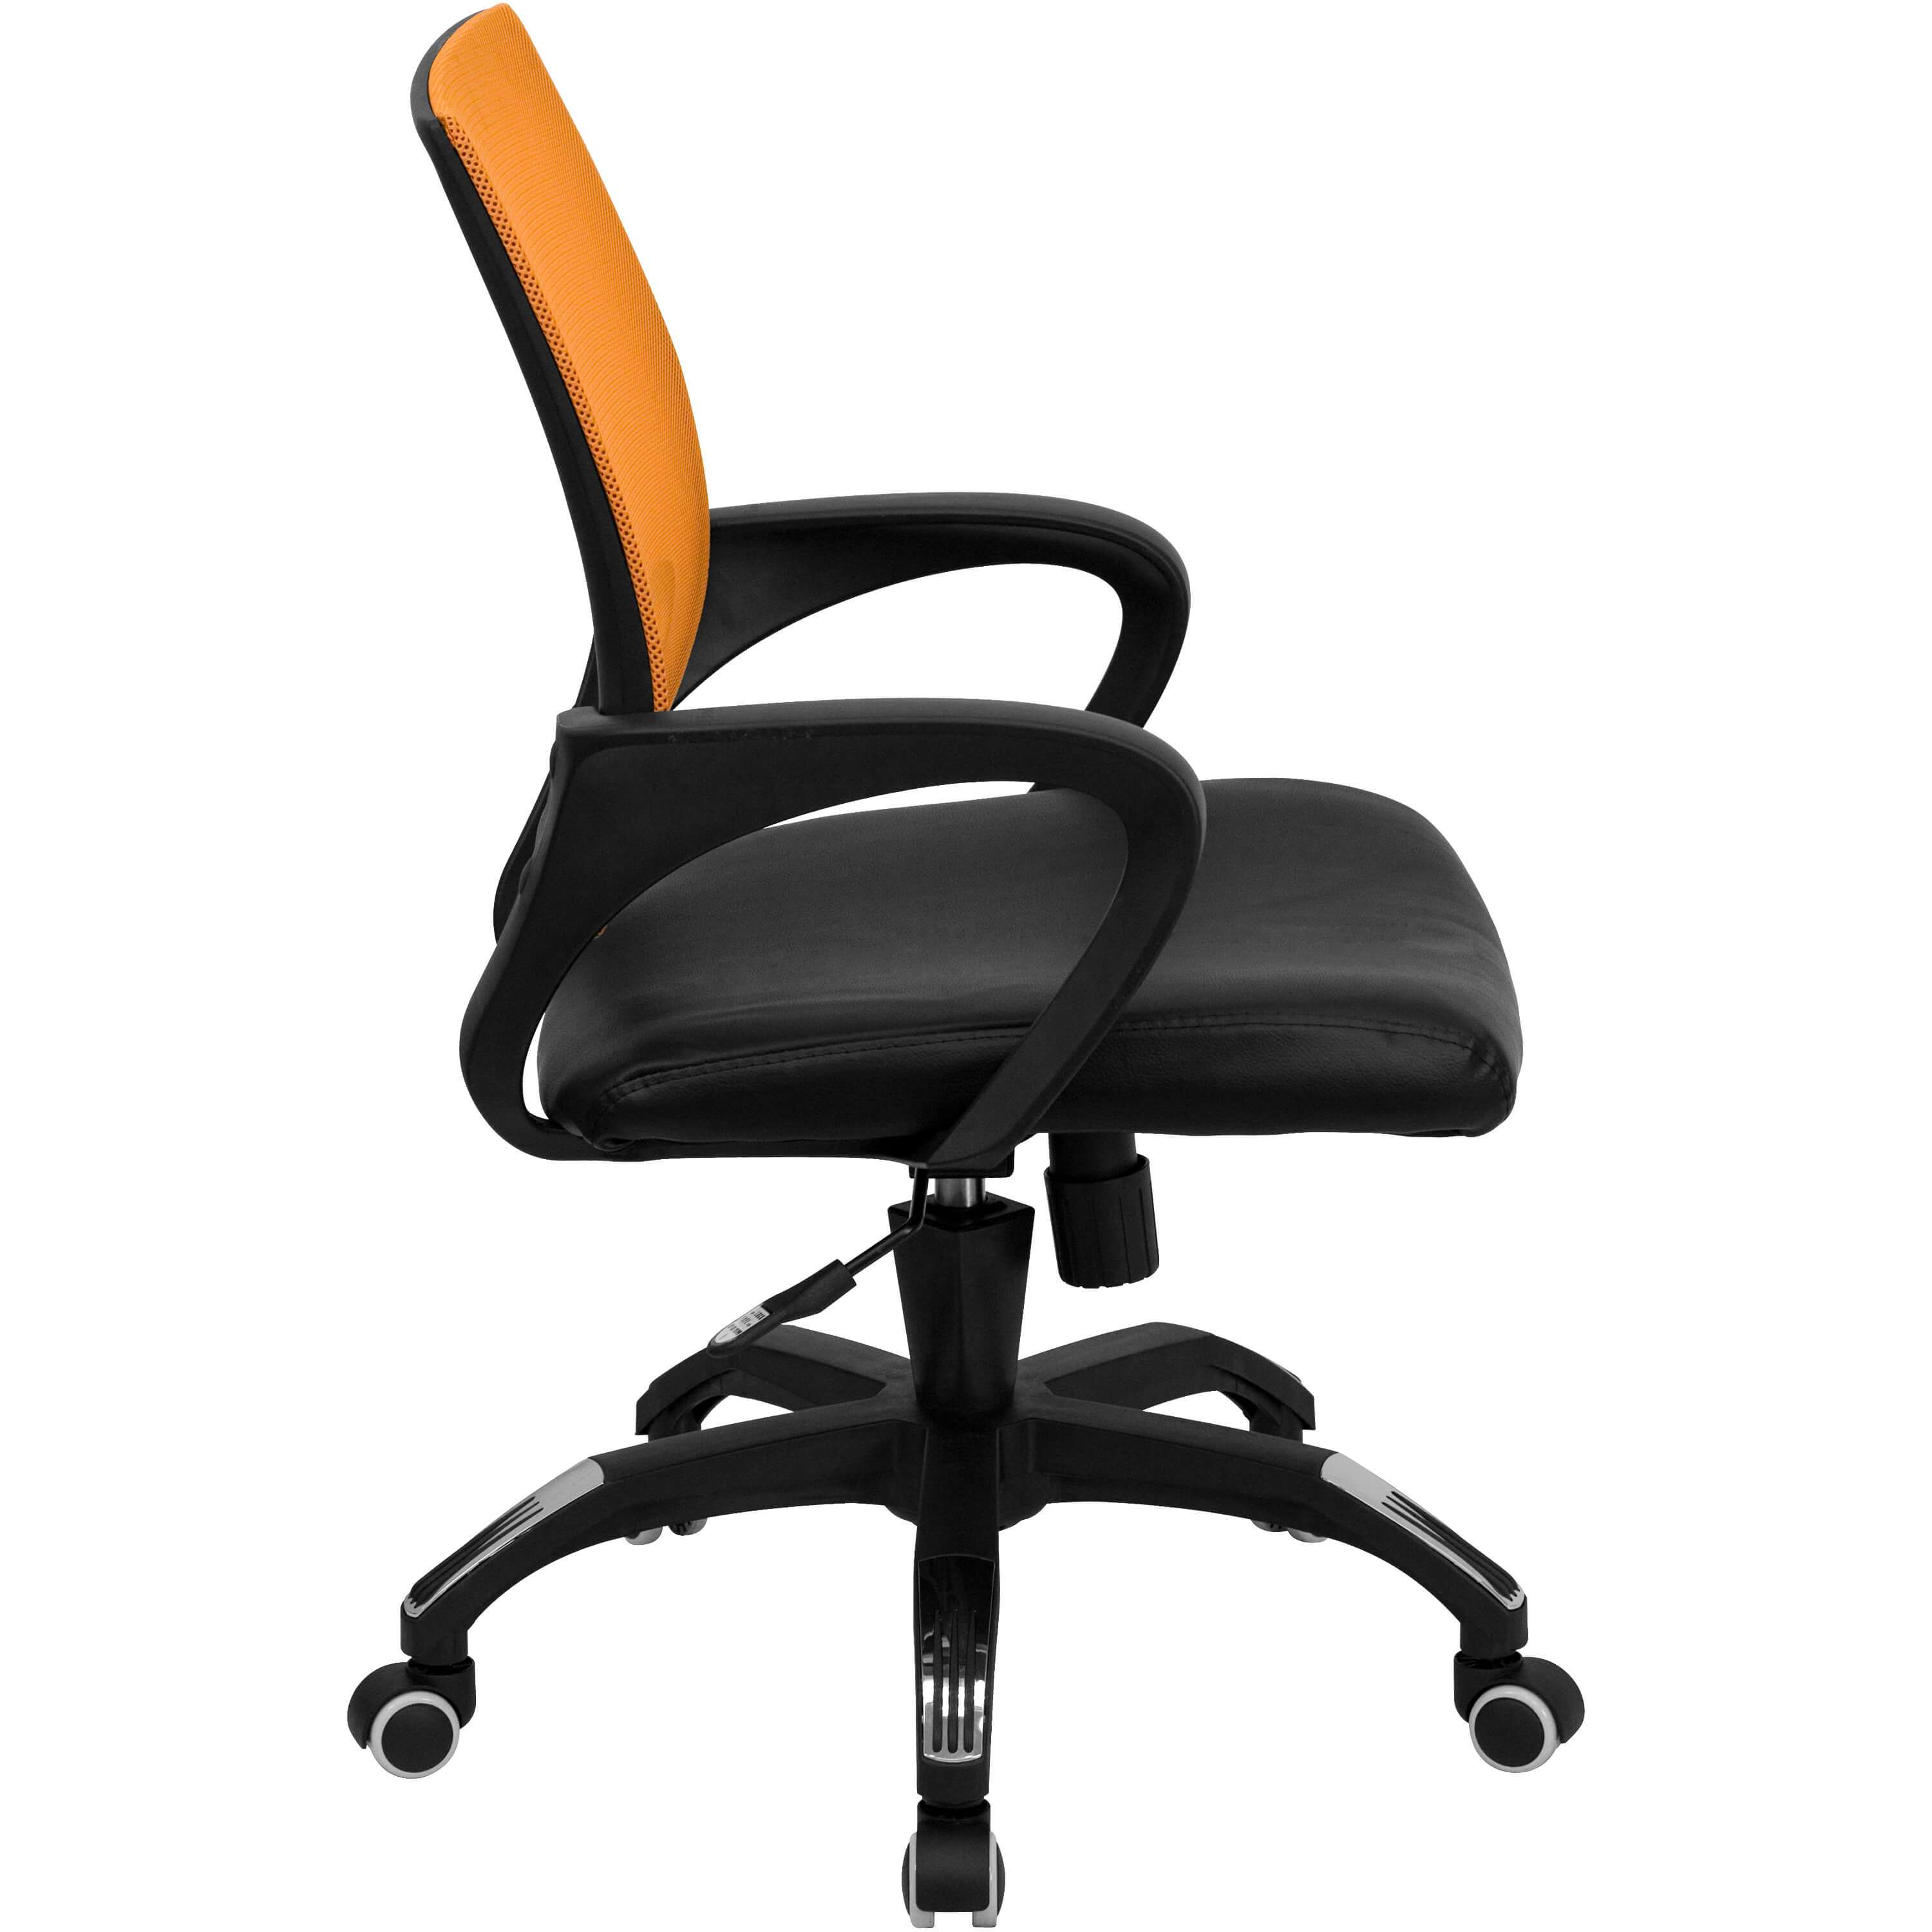 Comfortable office chair side view